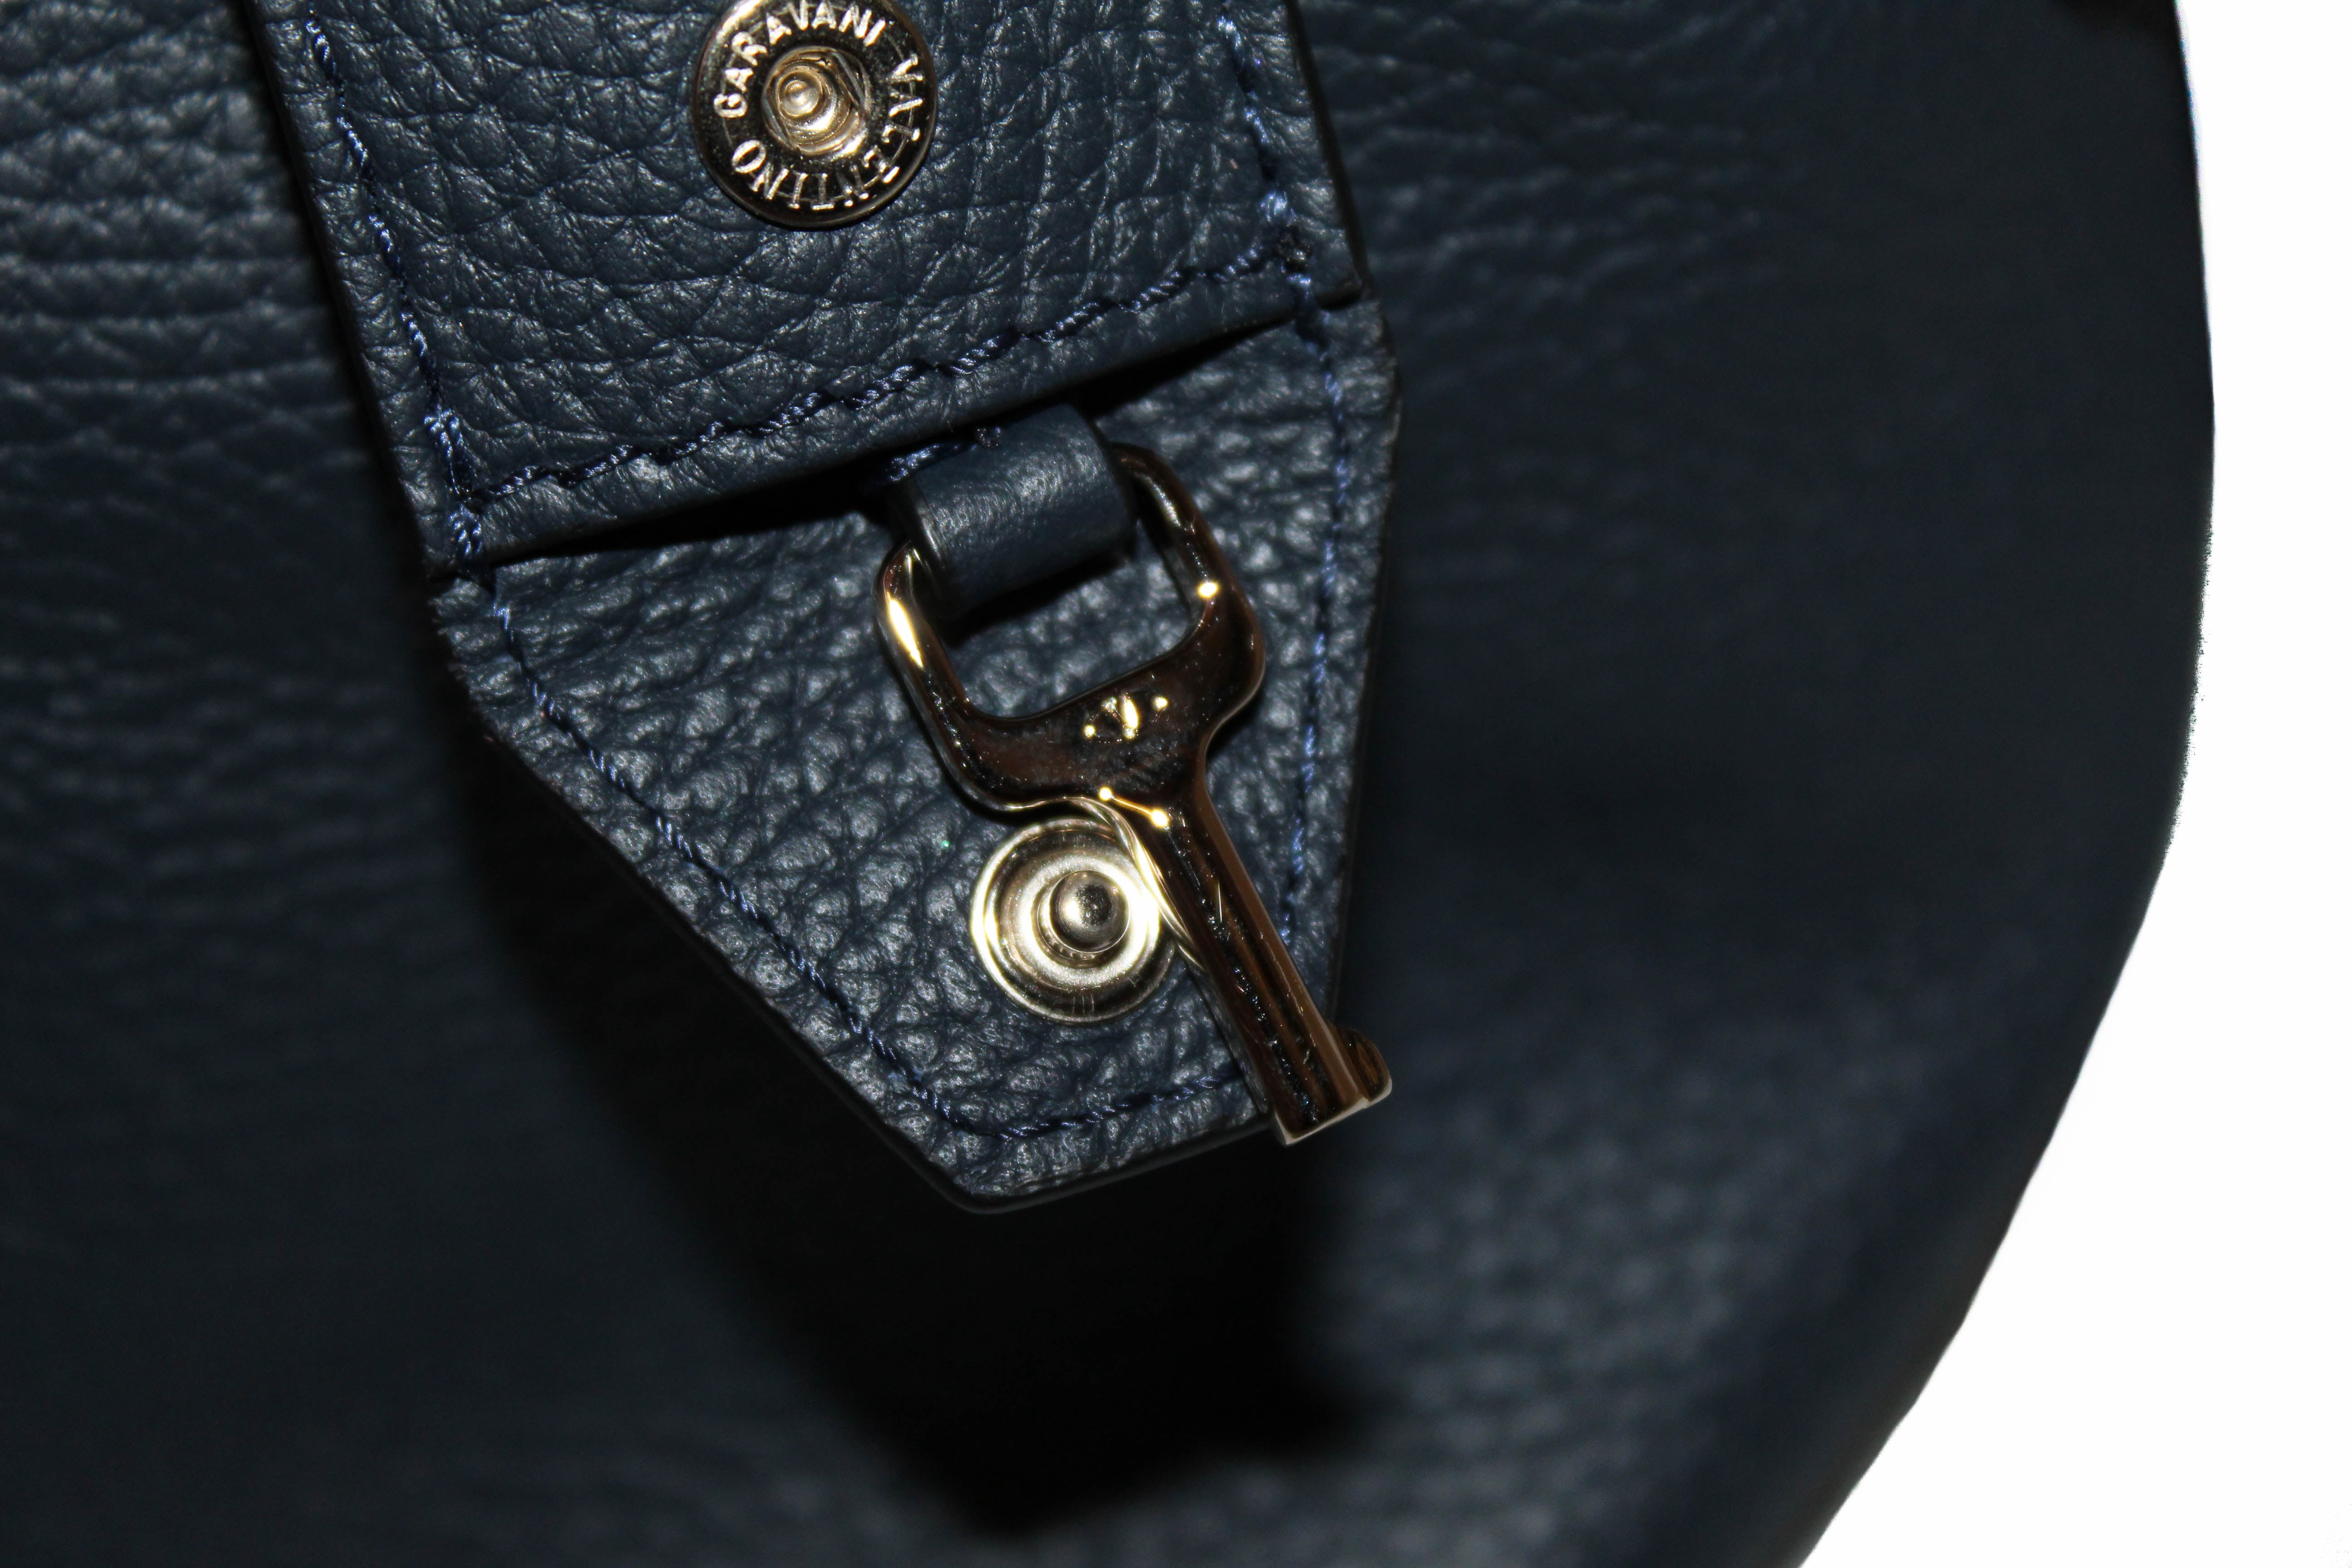 Genuine Mulberry Bayswater backpack in Navy with